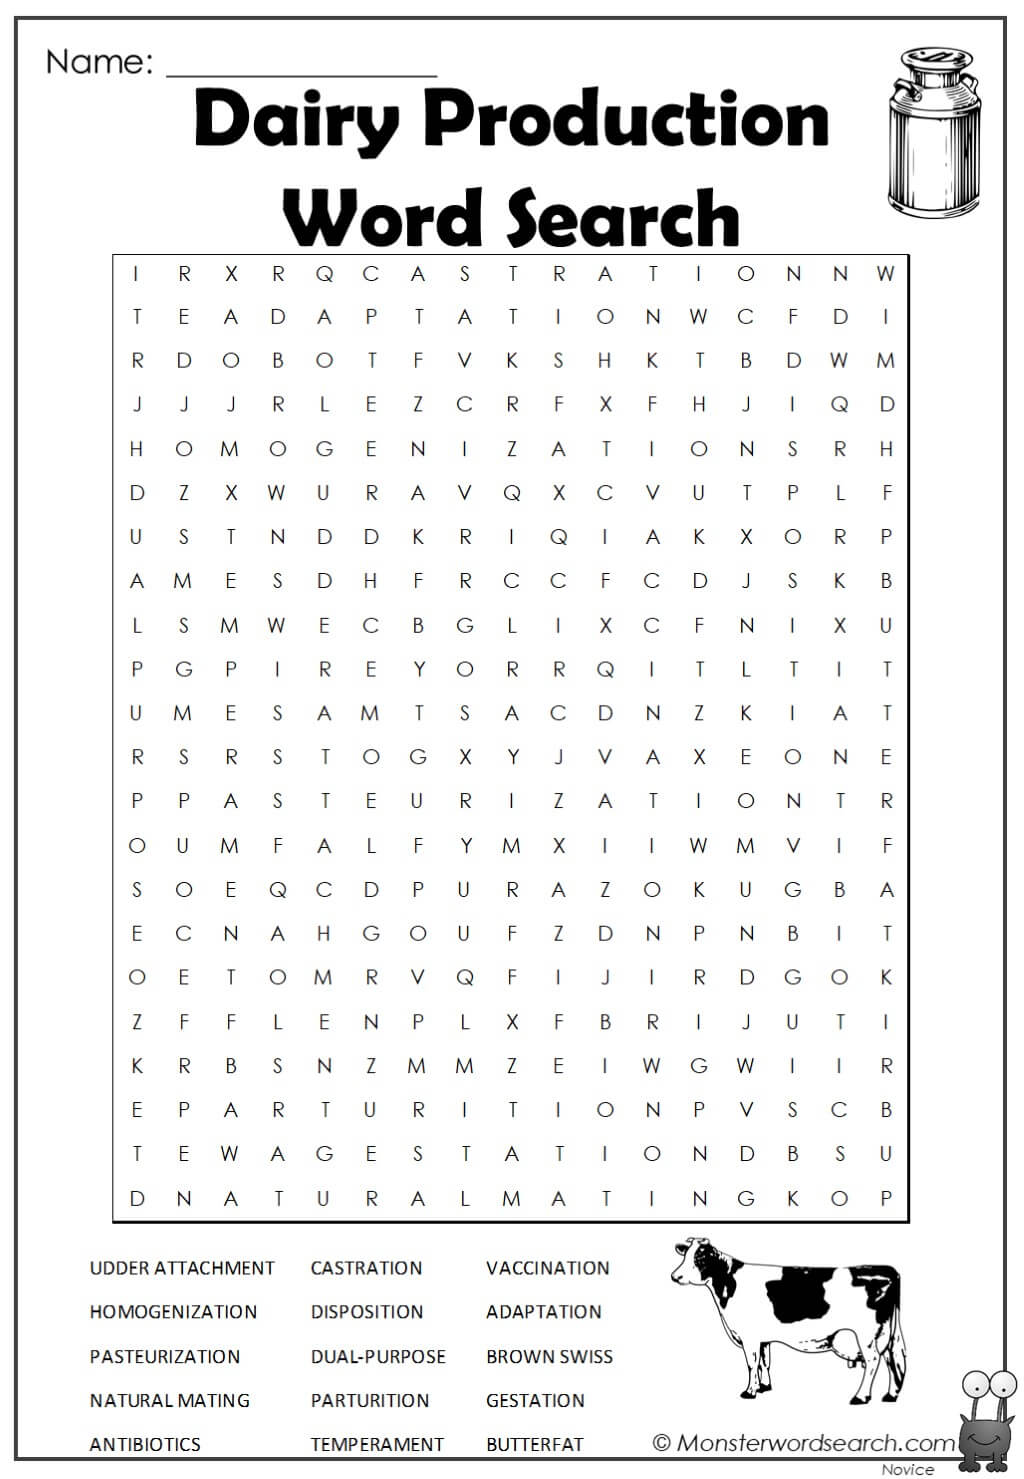 dairy-production-word-search-monster-word-search